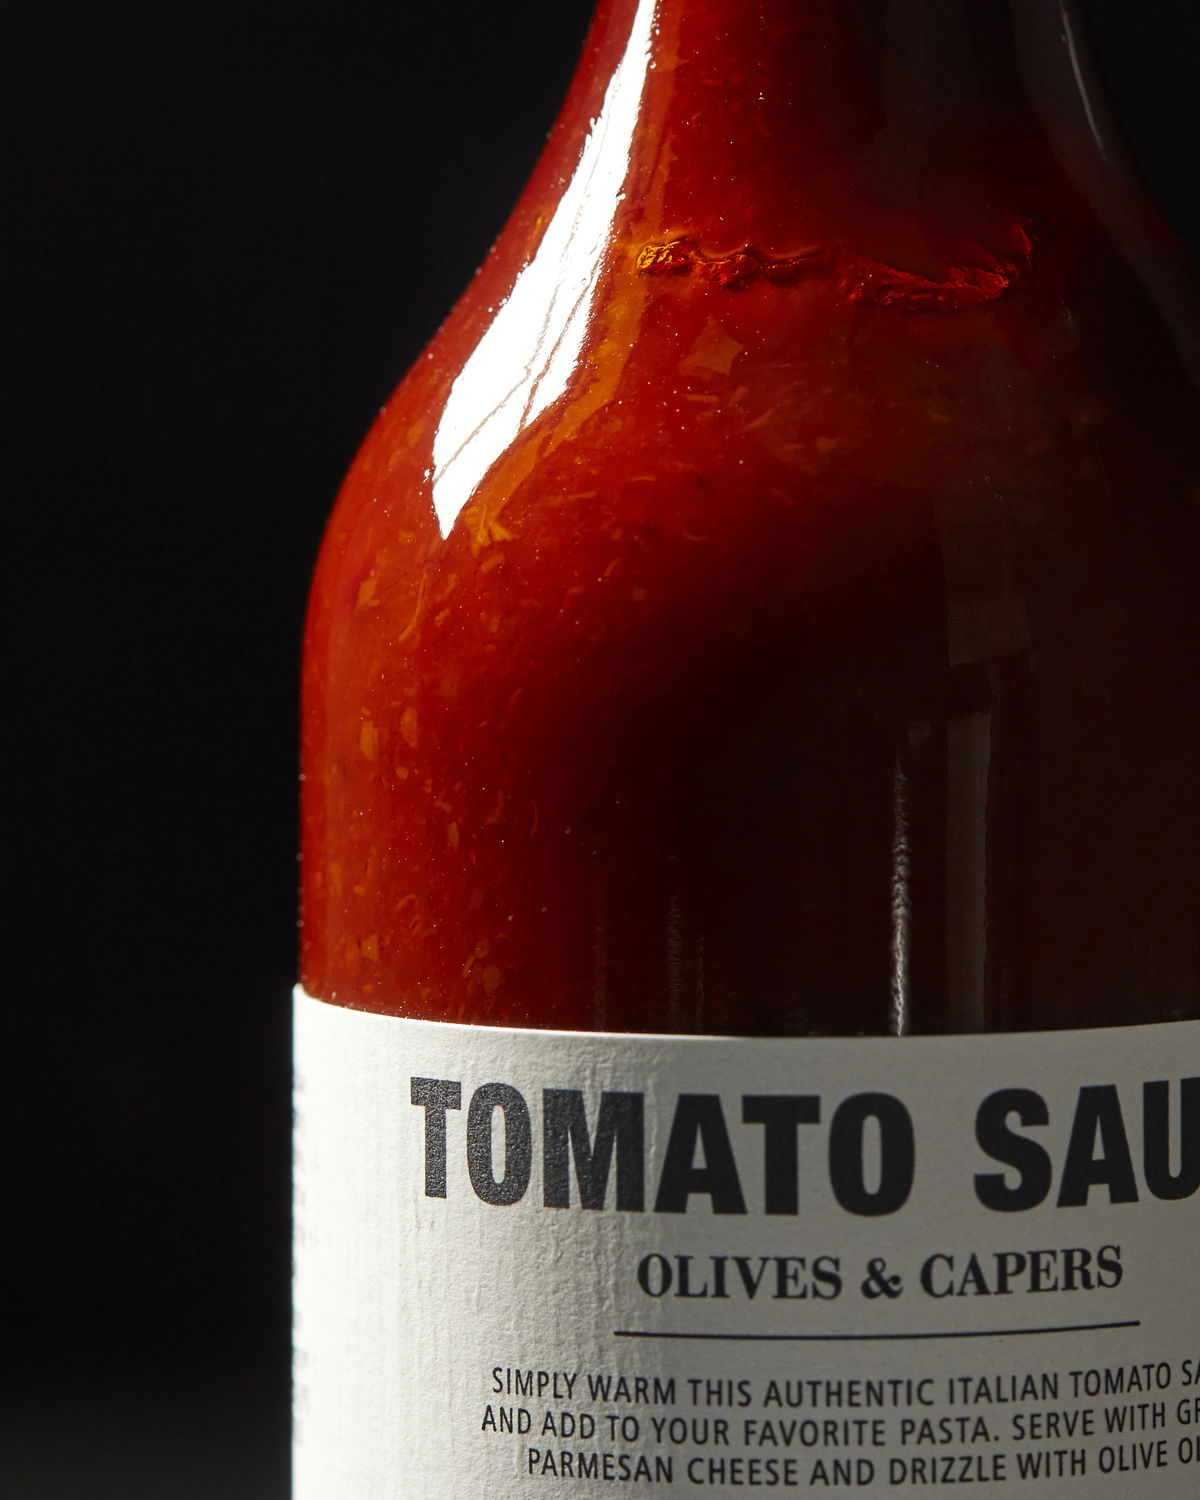 Tomato Sauce, Olives & Capers, 330 ml